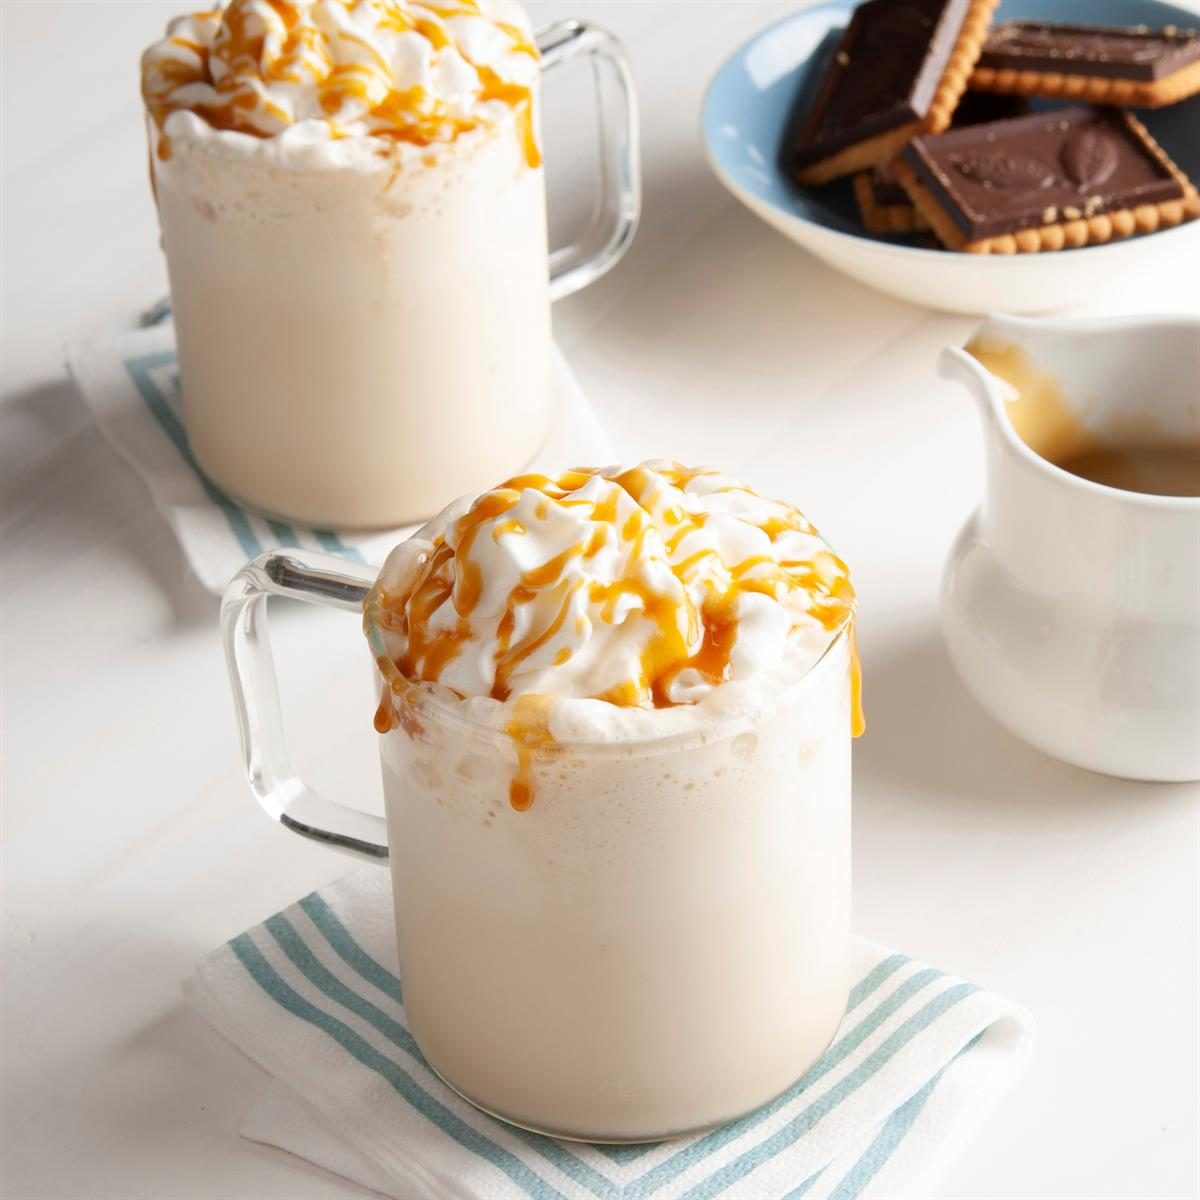 https://www.tasteofhome.com/wp-content/uploads/2018/01/Frosty-Caramel-Cappuccino_EXPS_FT20_23509_F_0923_1.jpg?fit=700%2C1024